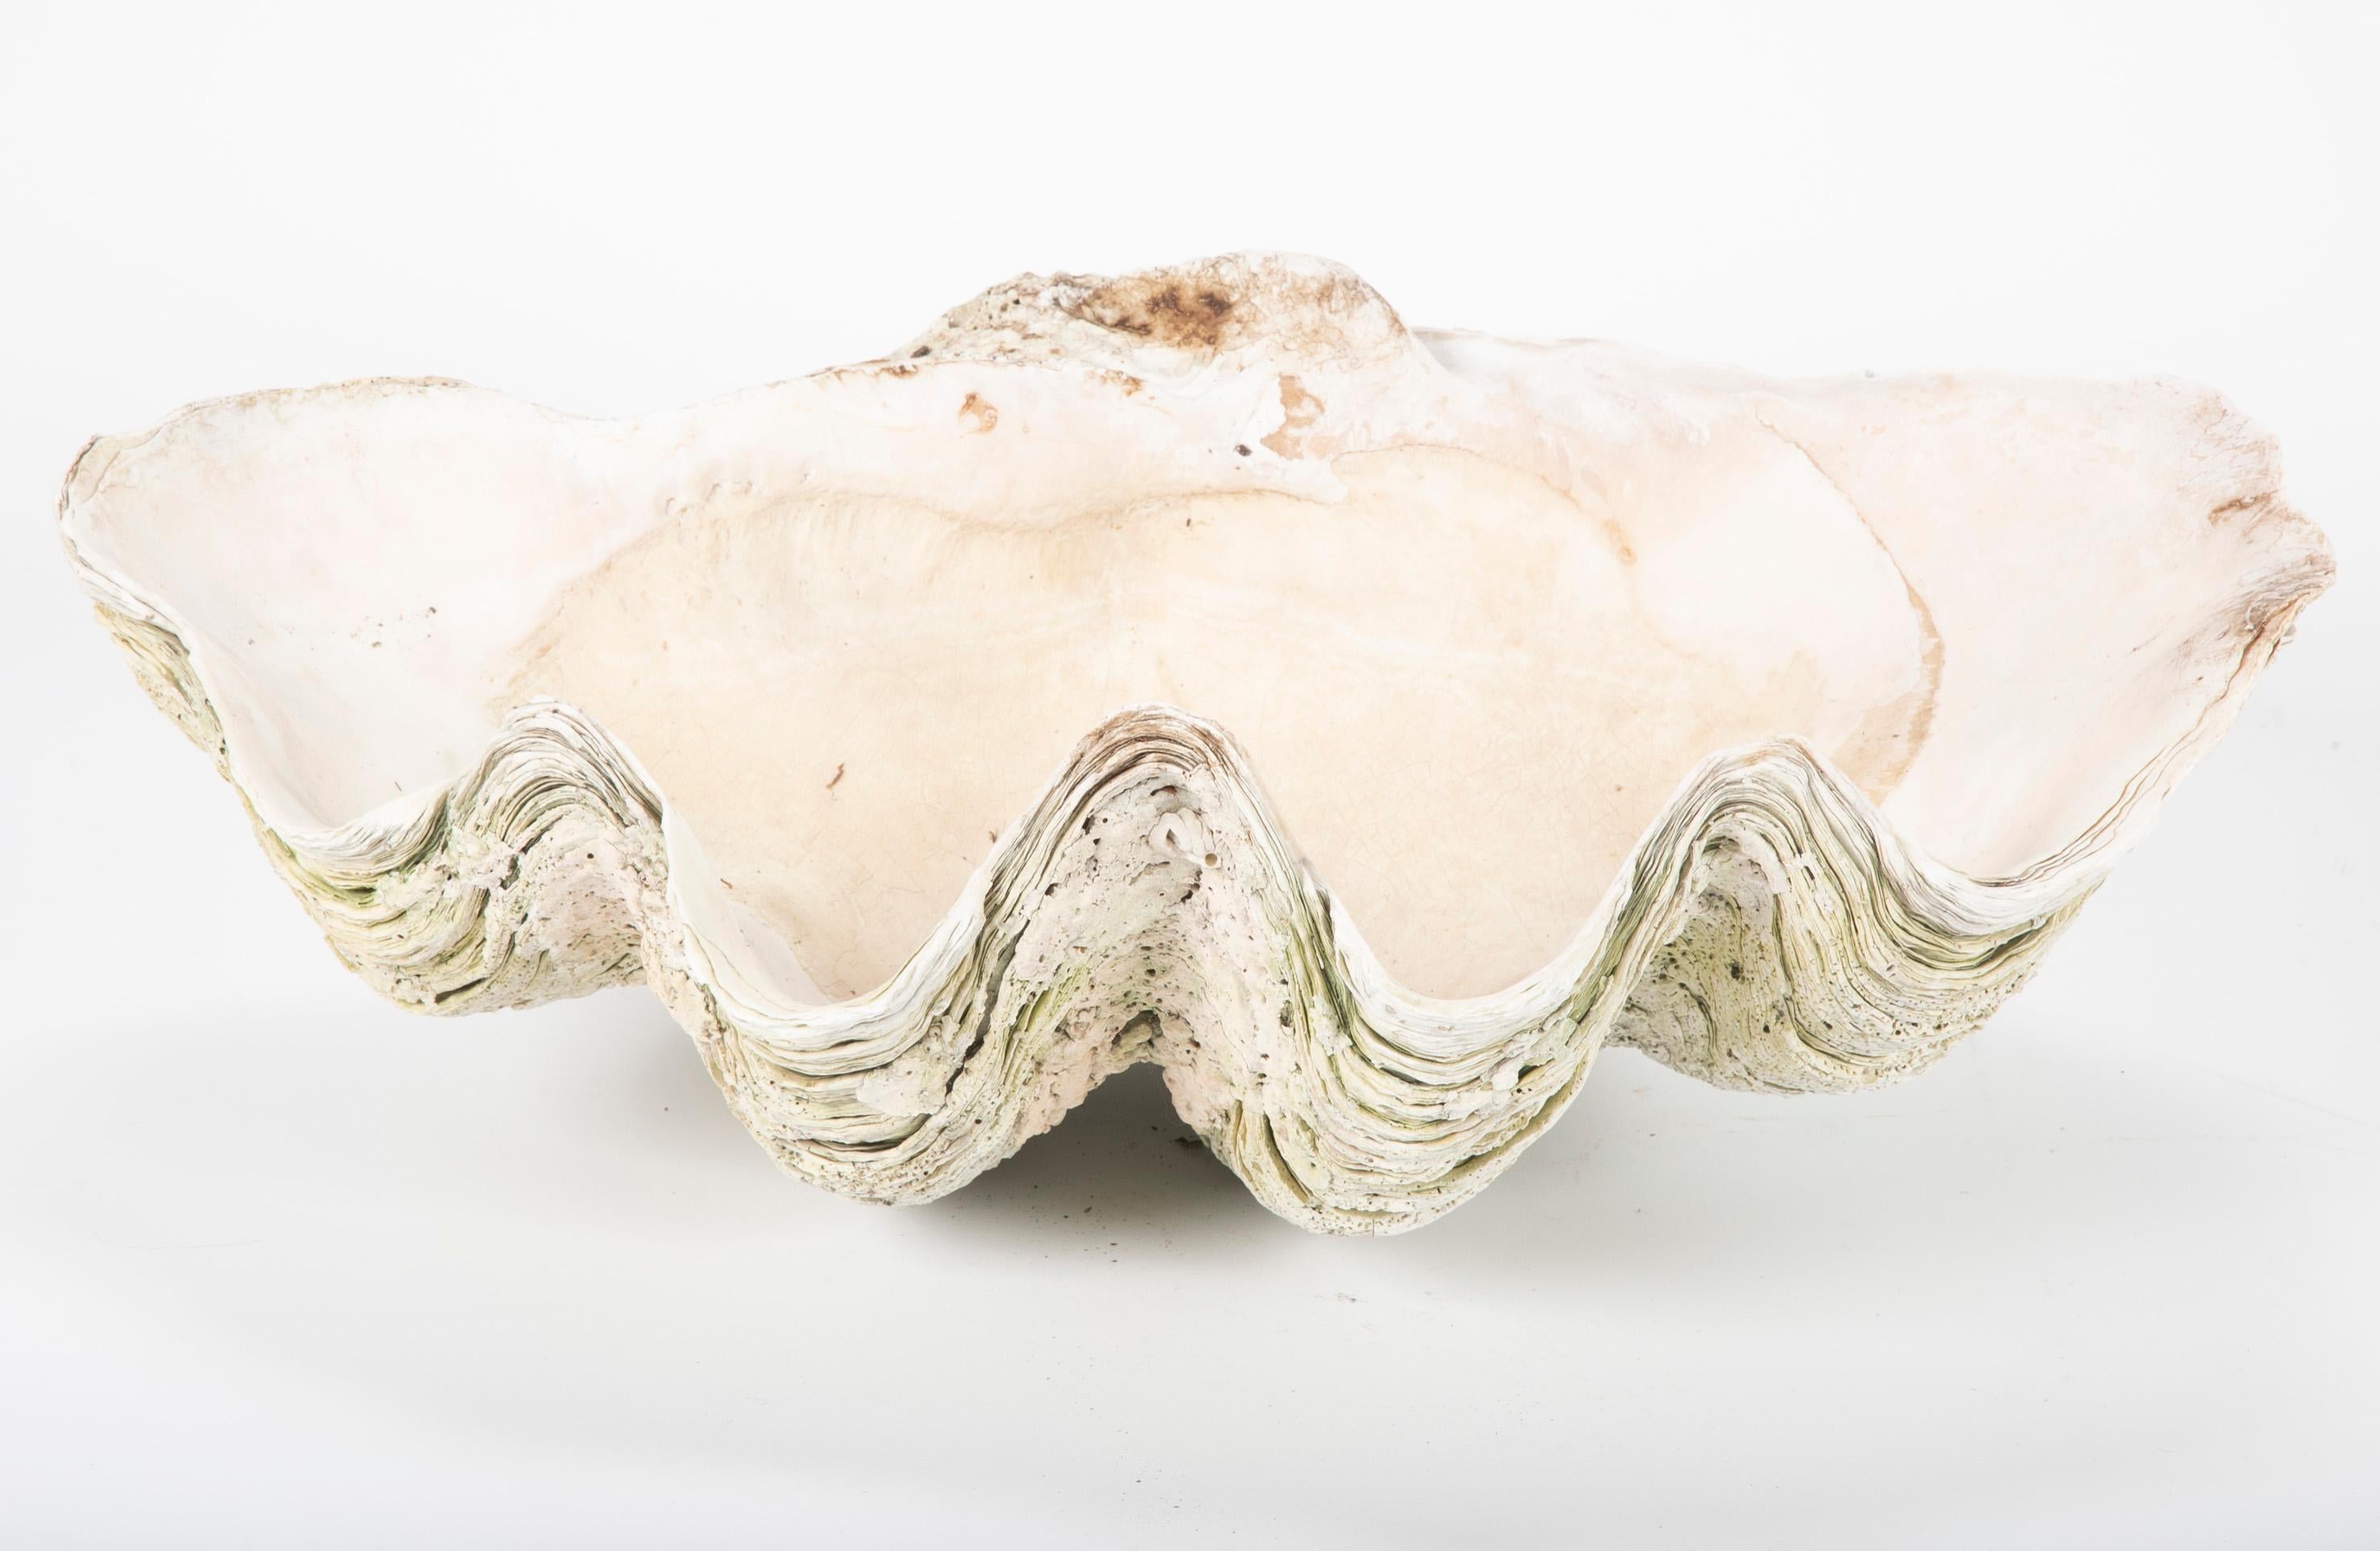 Wonderful example of a giant clam shell from the Indian Ocean. The bleached white color and high profile of the scallops make this a distinctive centerpiece or decoration. 
It could also, of course, be used as a bird bath. I have fond memories as a